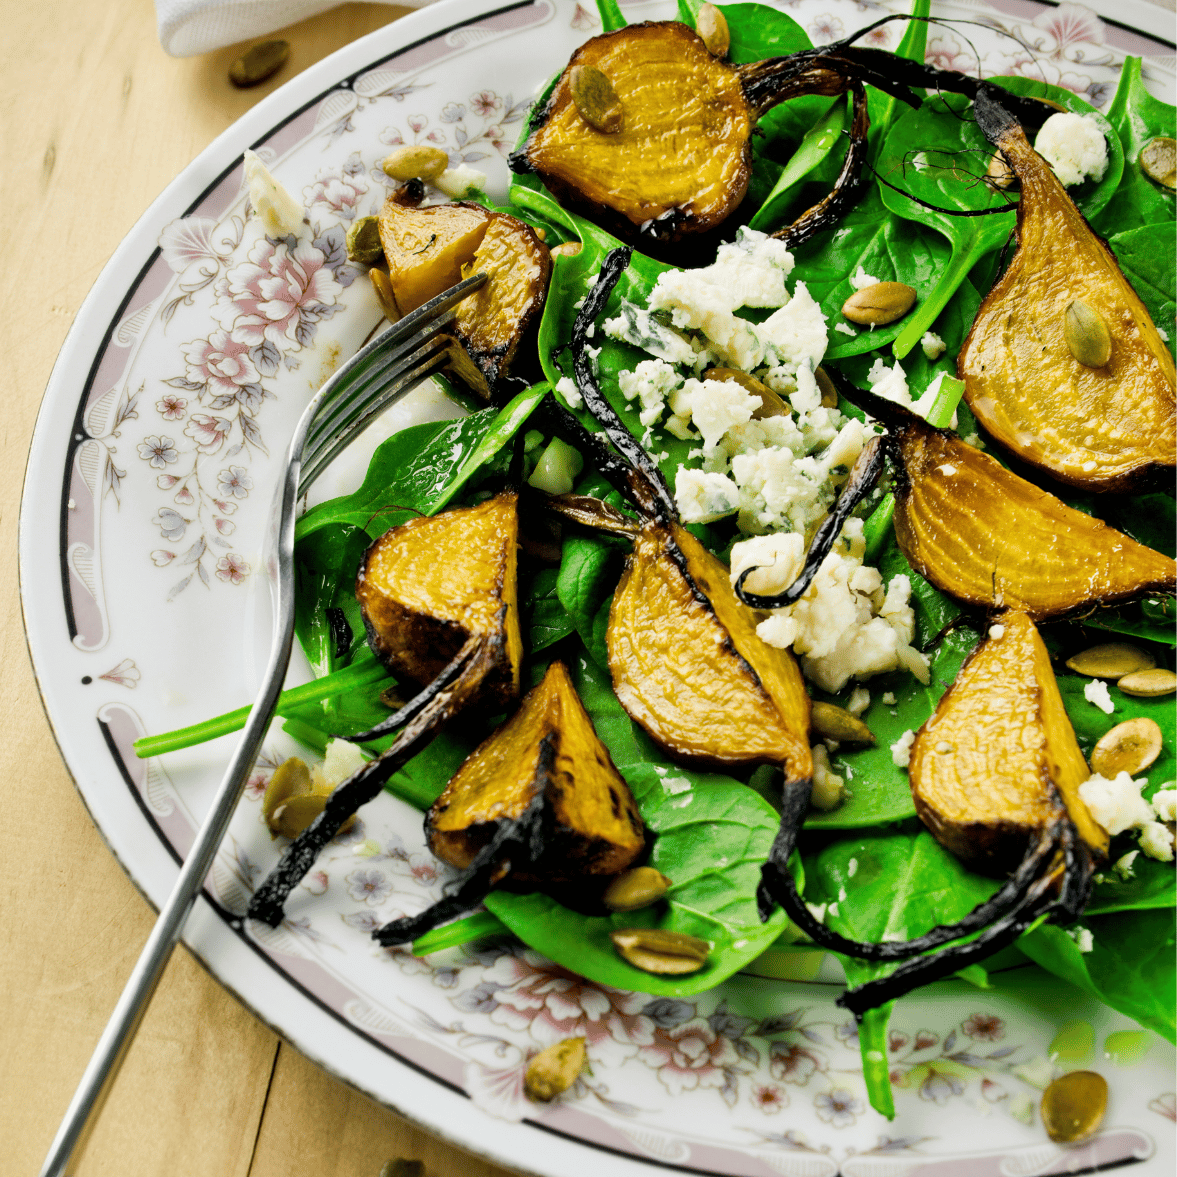 plat of salad with golden beets